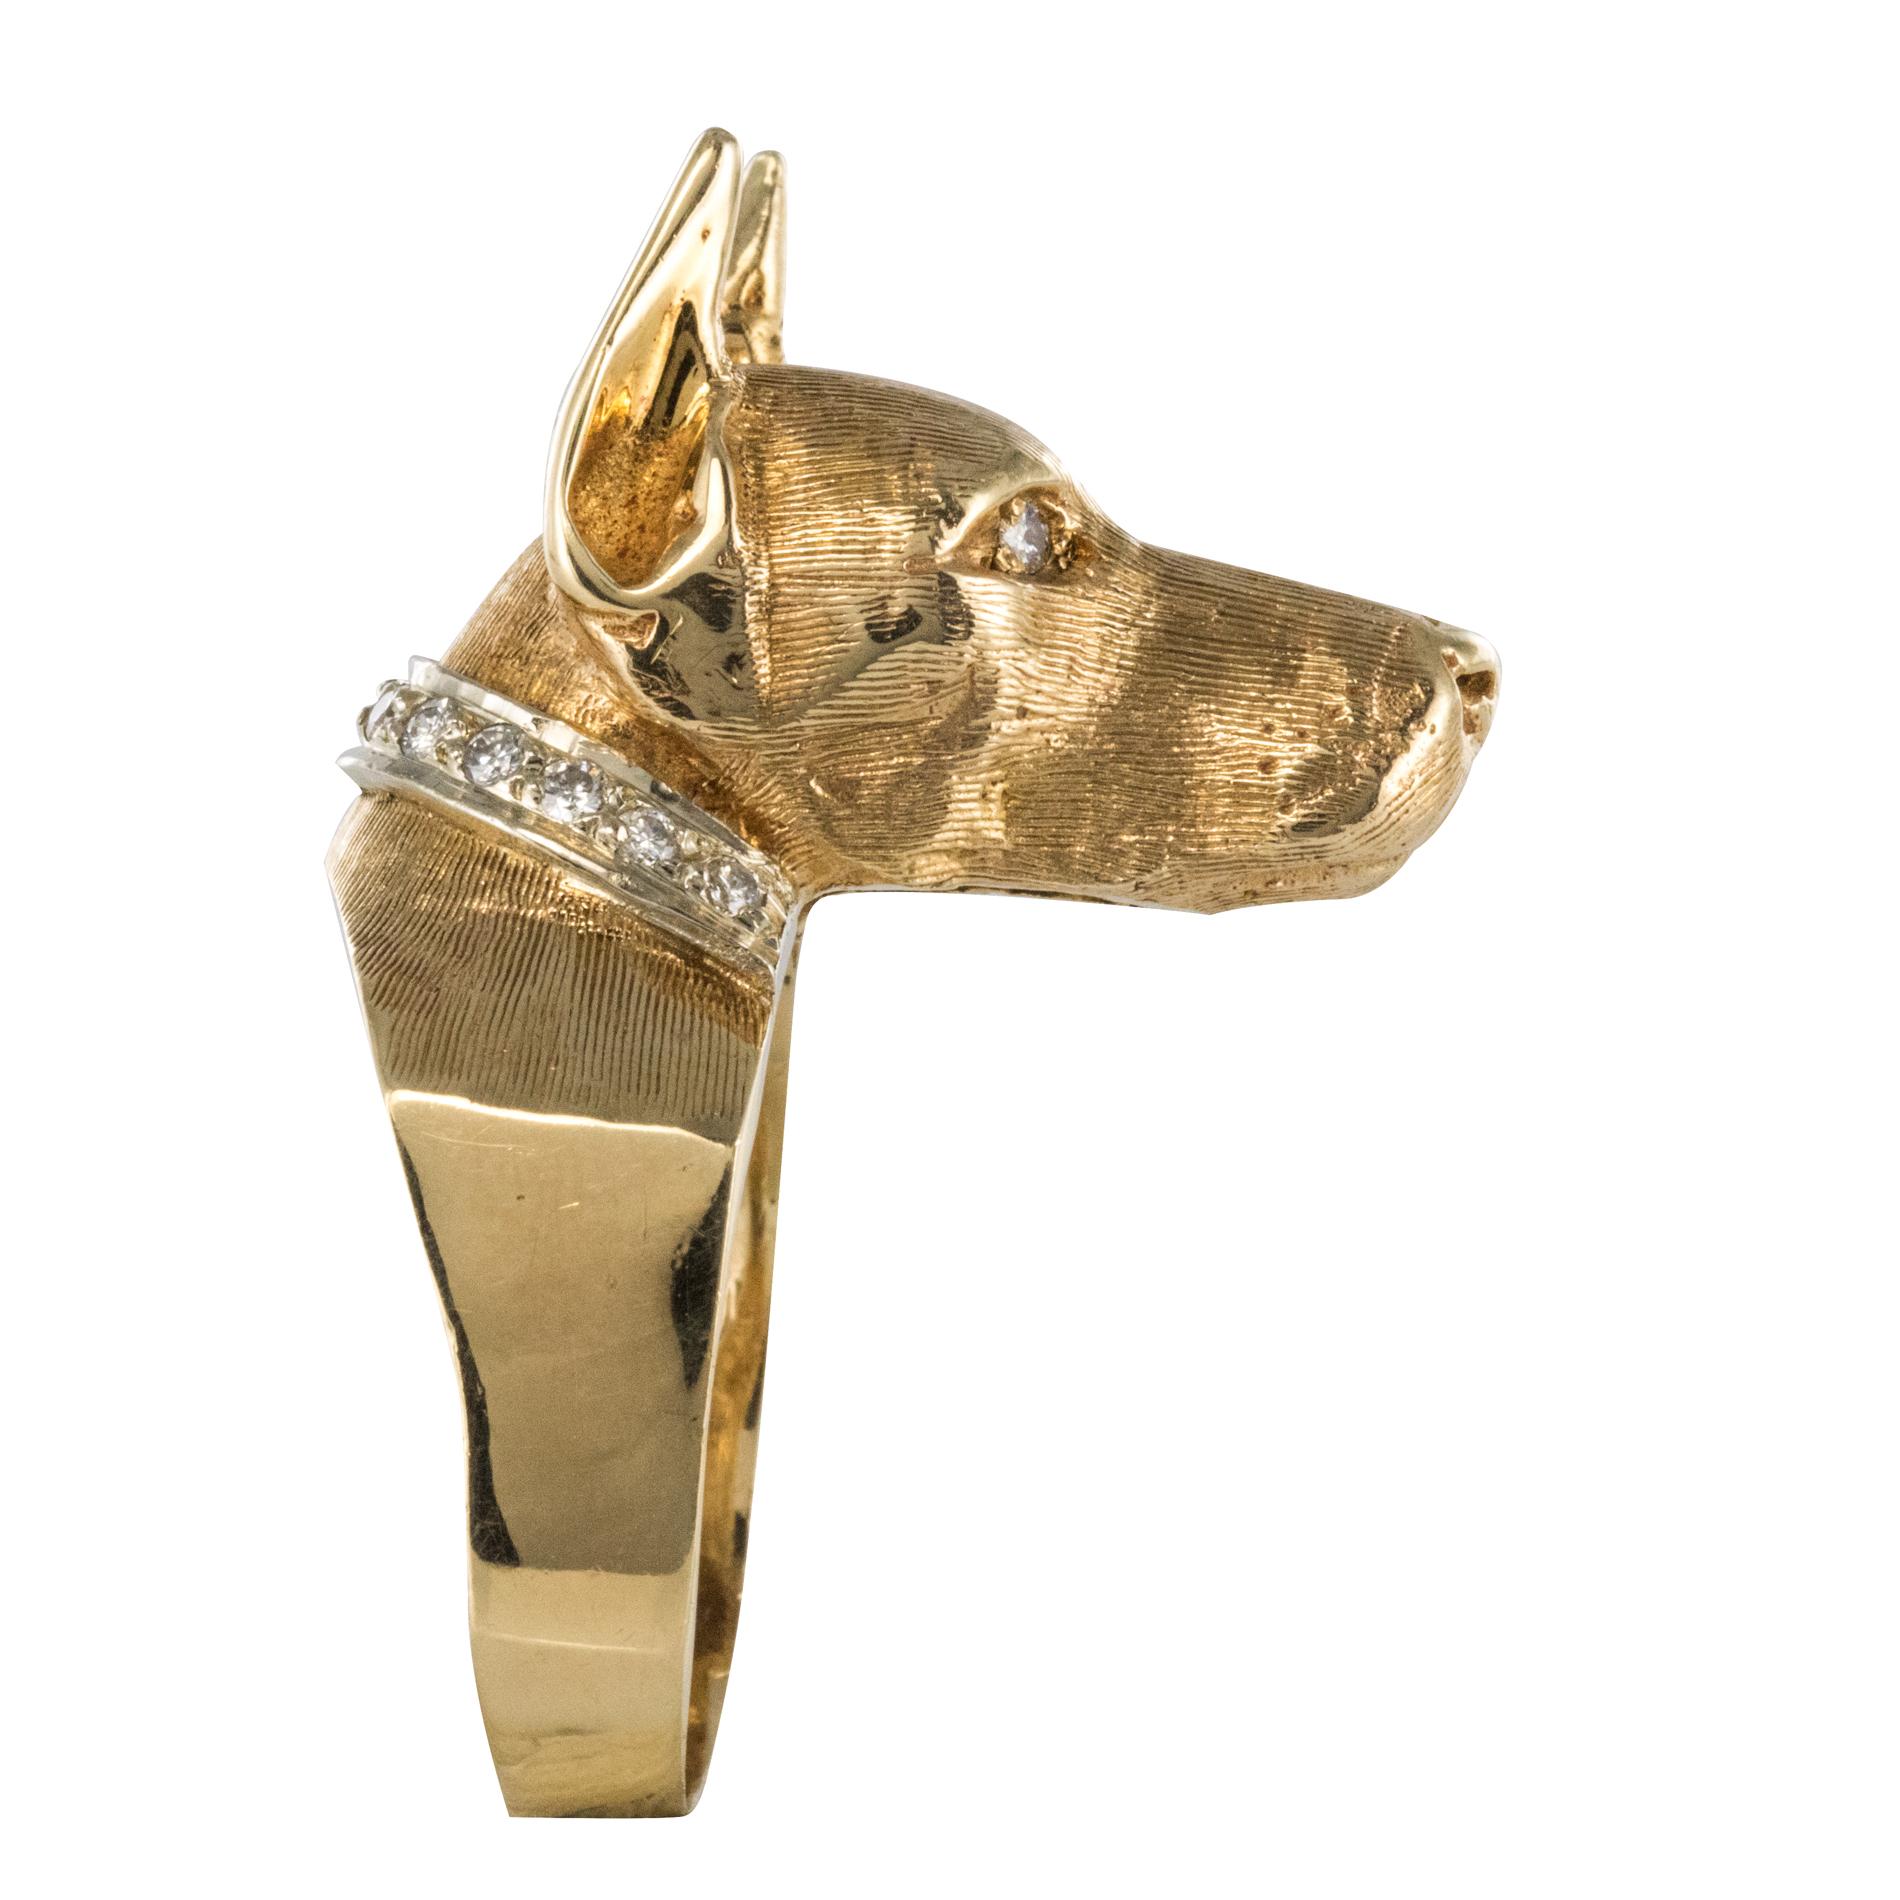 Ring in 14 karat yellow gold.
Original and unprecedented, this retro ring represents a Dogue head in amati gold, whose eyes and necklace are set with diamonds.
Height: about 1.6 cm, width: about 1.2 cm, head length: about 1.2 cm, thickness at the